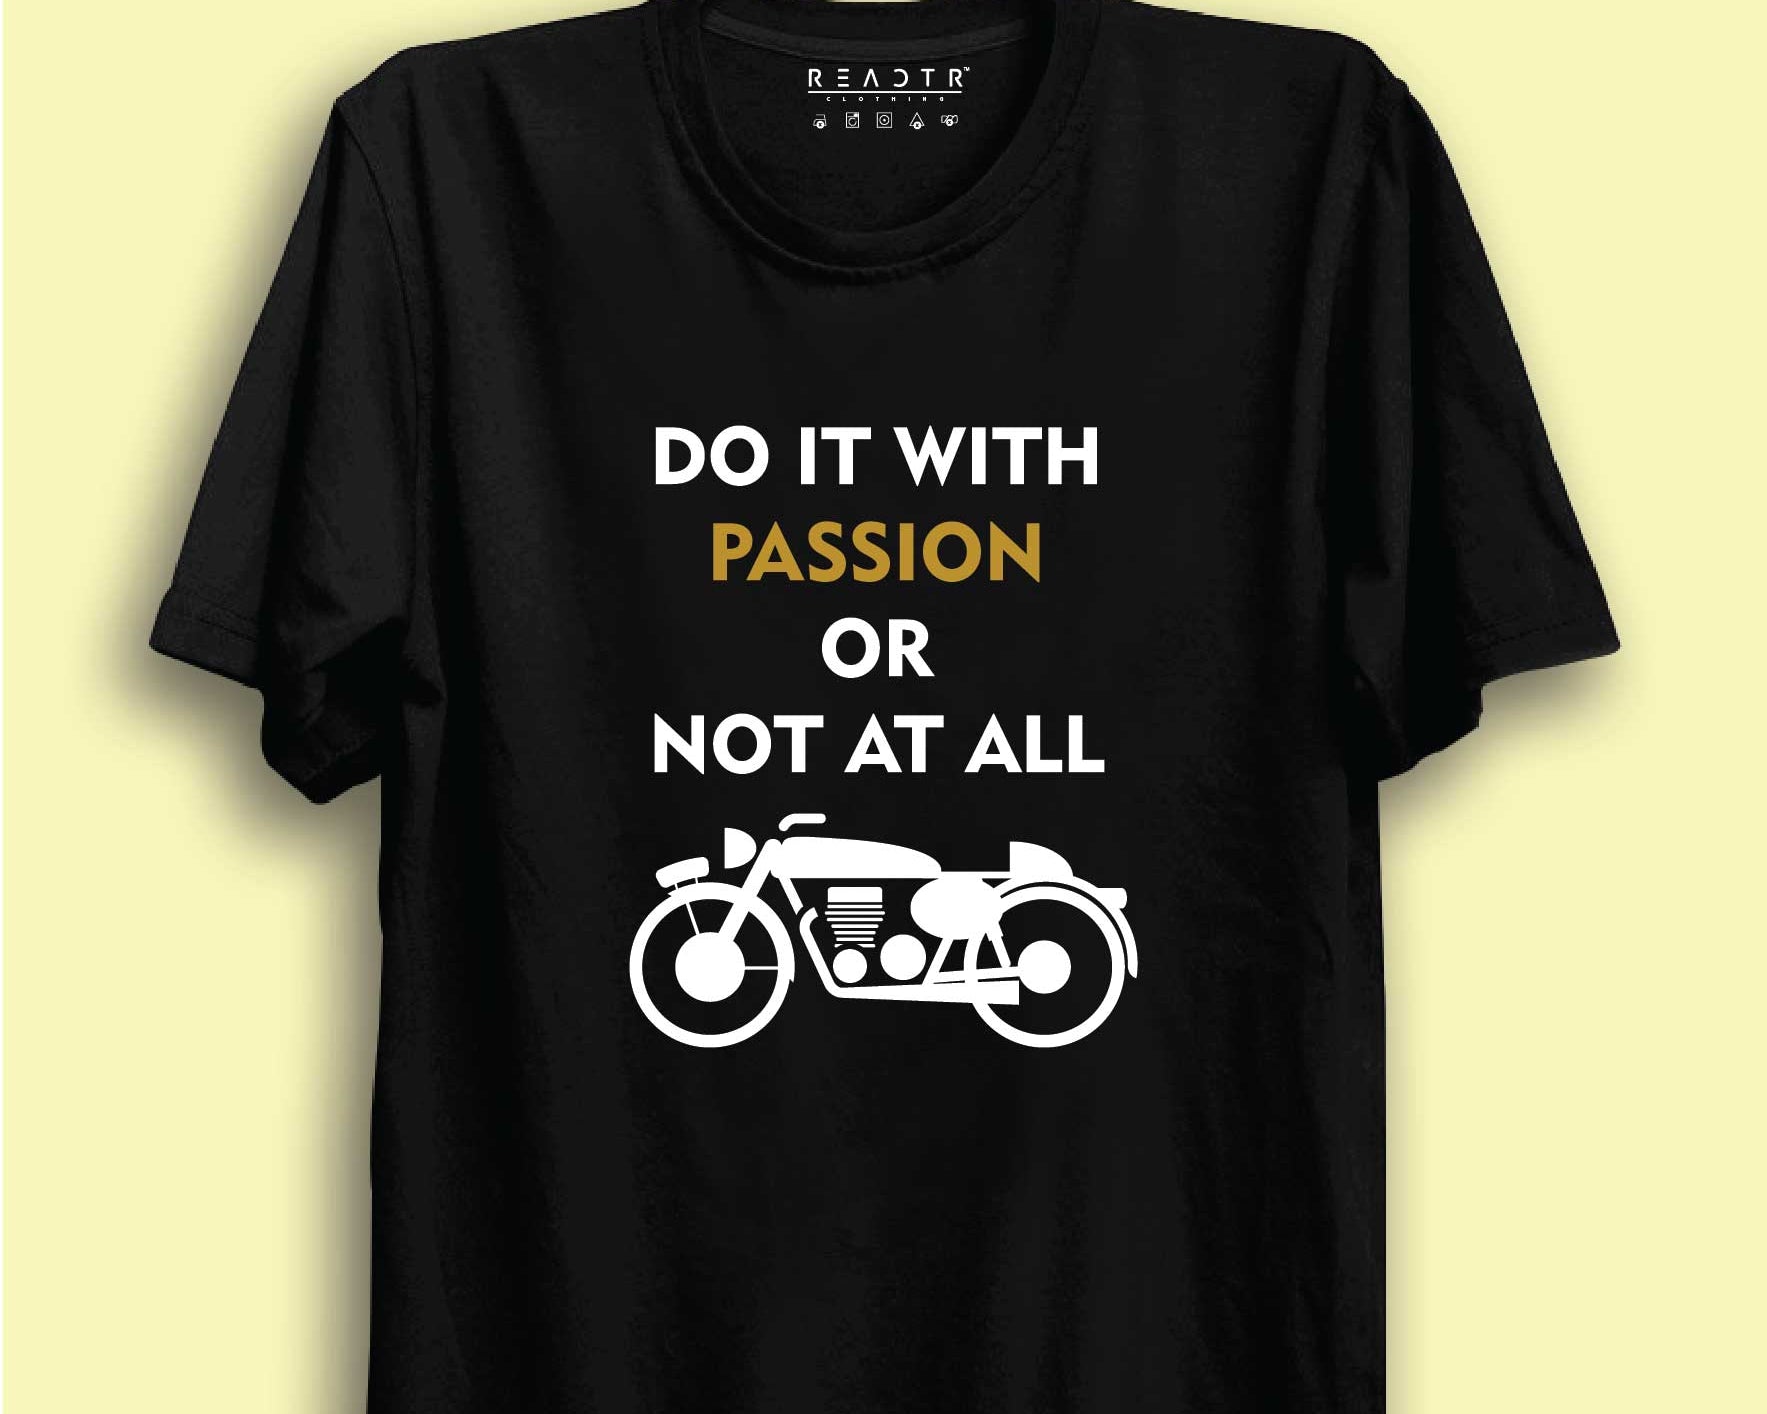 Do it With Passion Reactr Tshirts For Men - Eyewearlabs